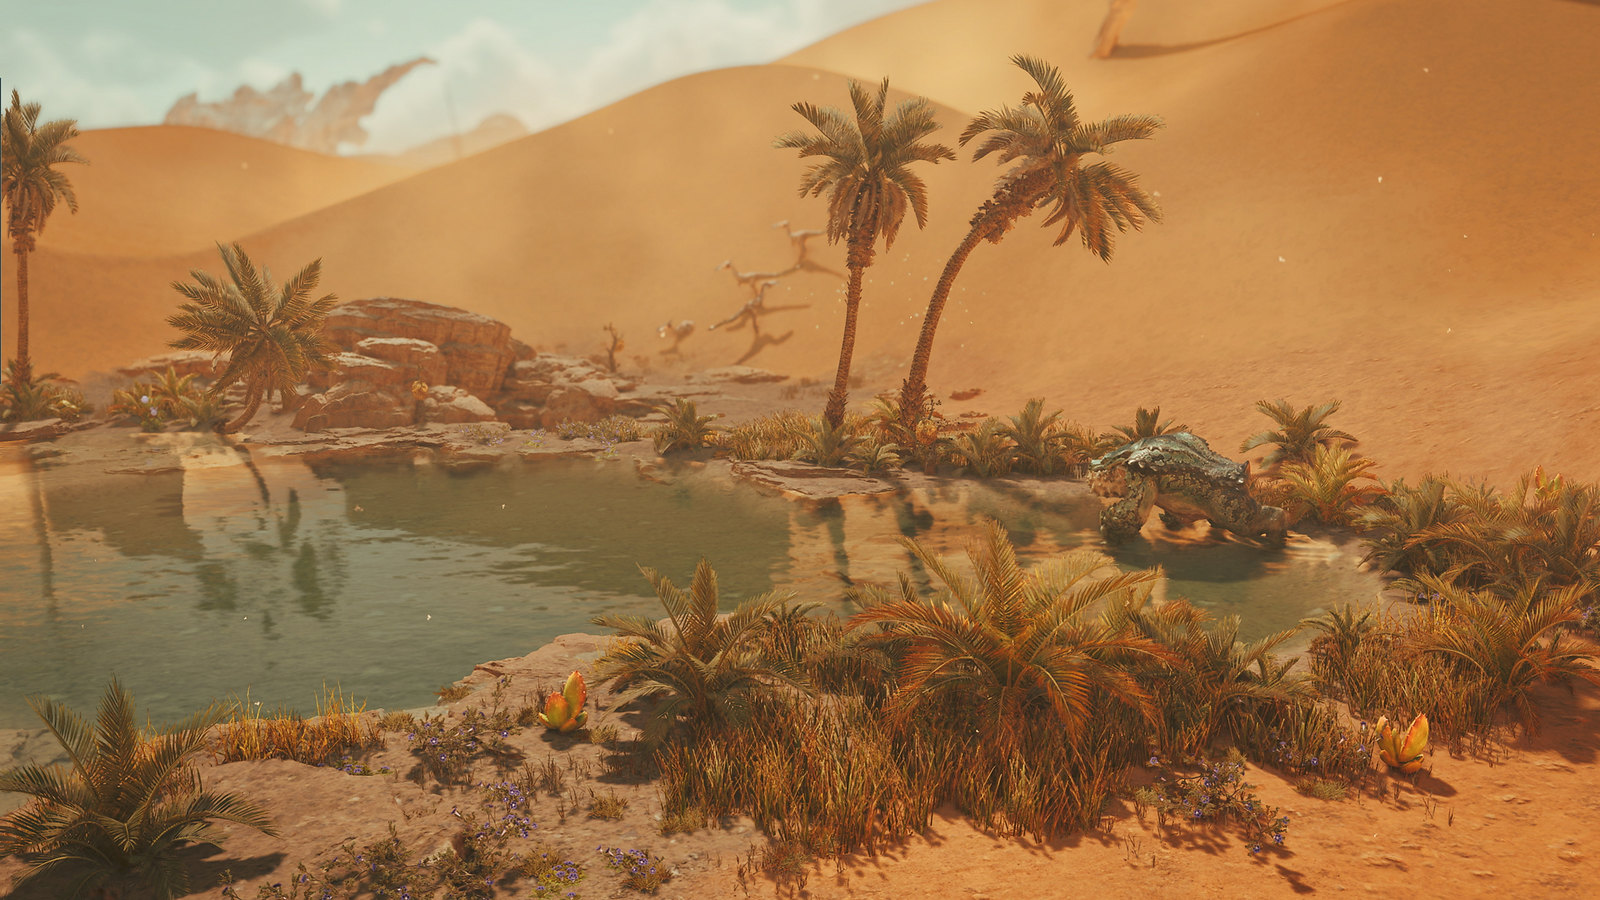 This image shows an oasis in the middle of sandy dunes. 